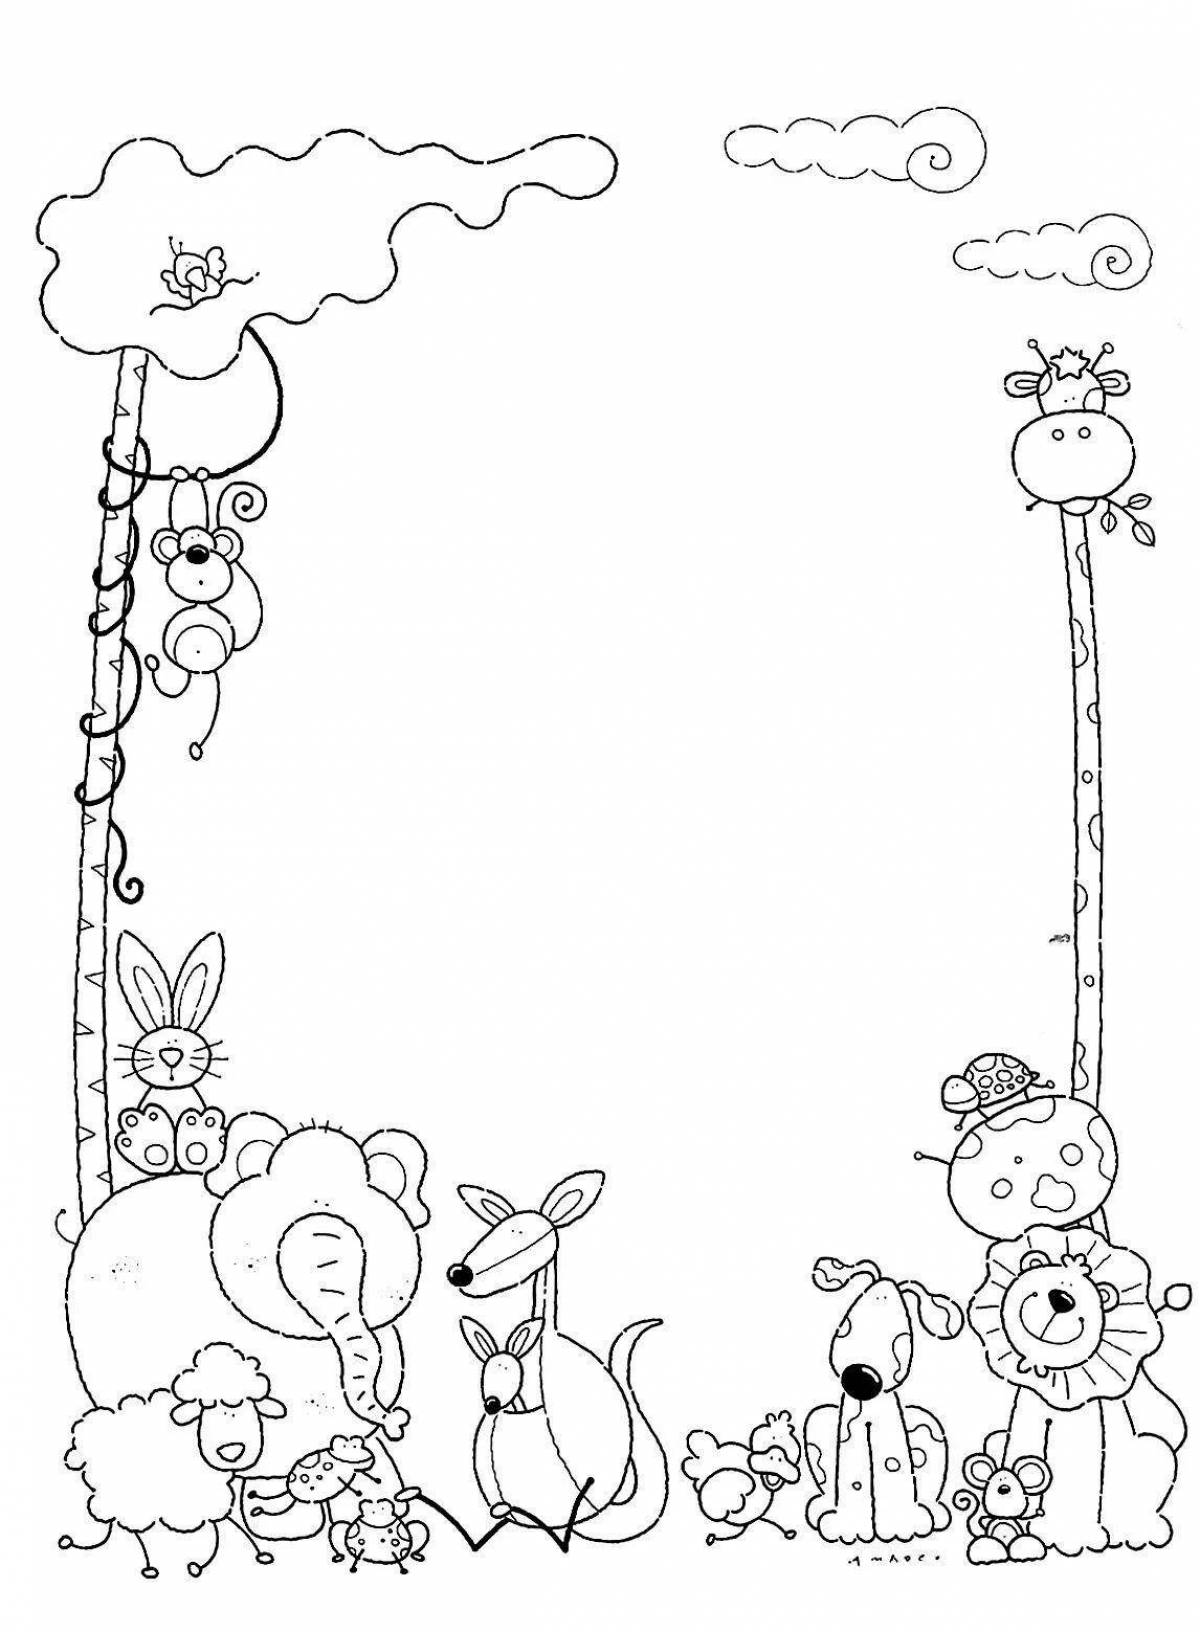 Creative coloring book for kids